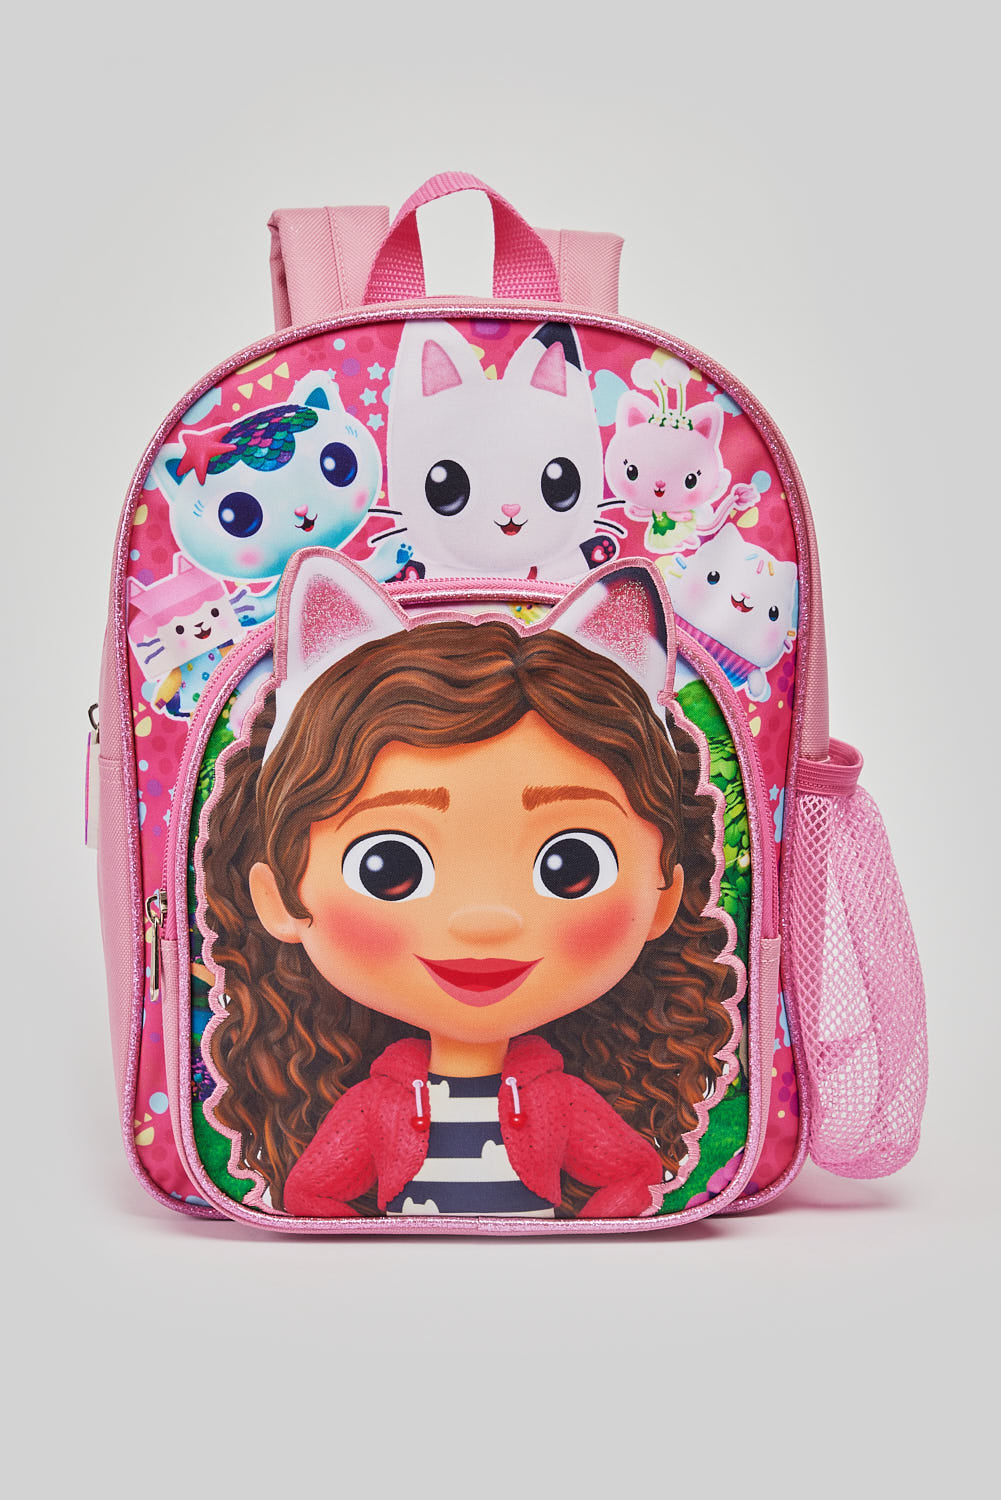 GABBY’S DOLL HOUSE ‘GABBY CATS’ ARCH BACKPACK